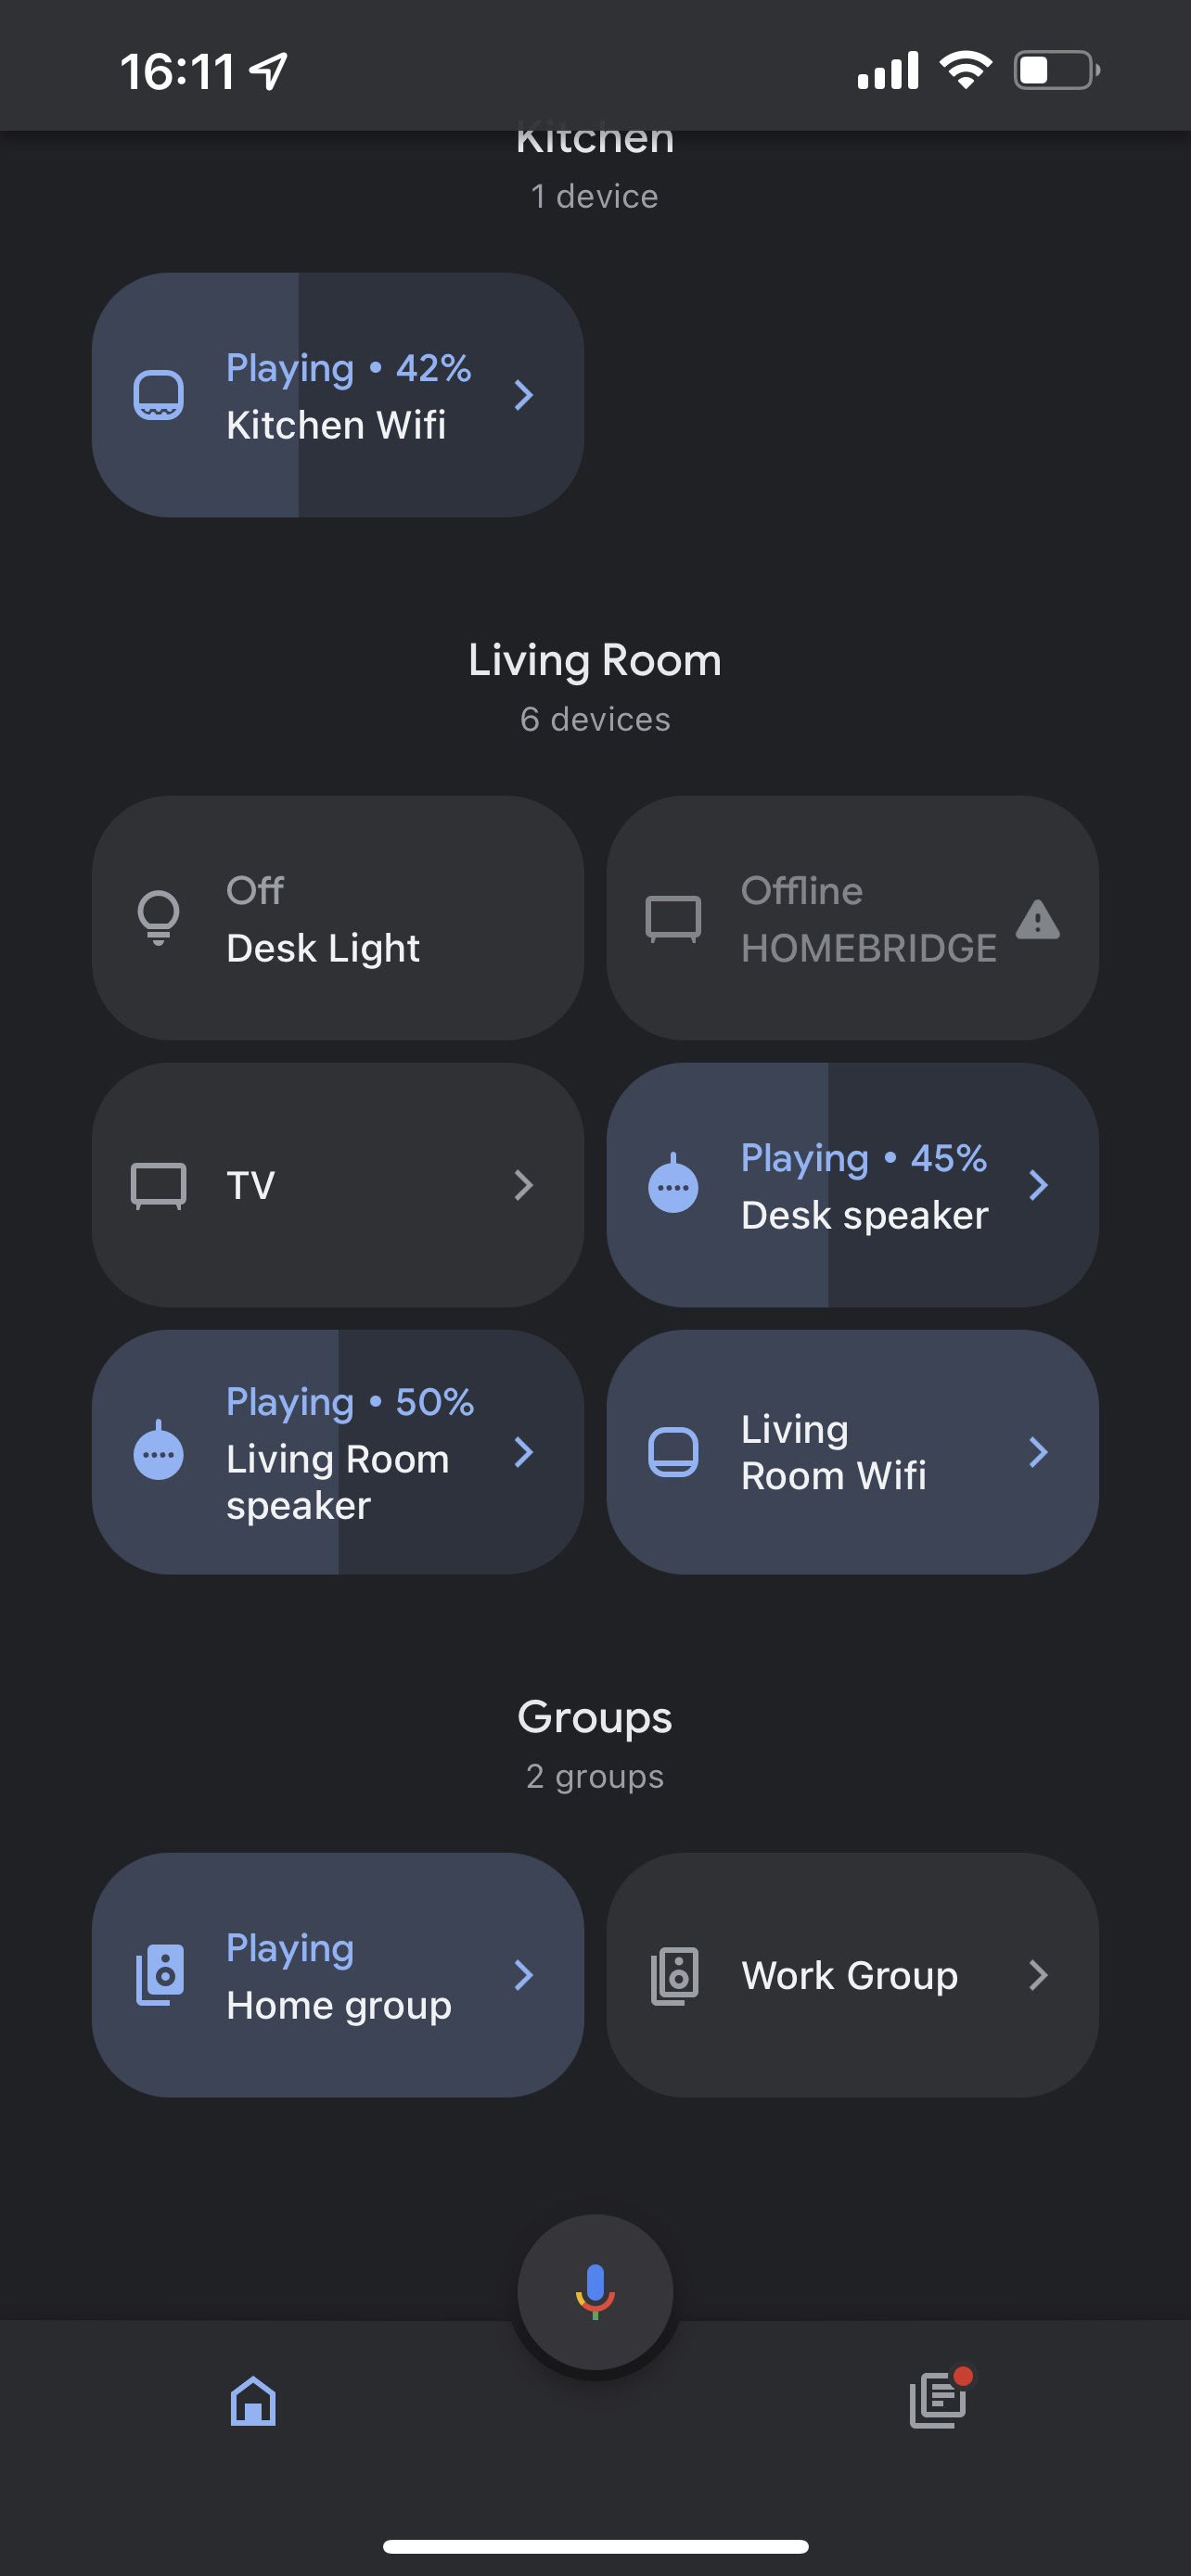 How do I add my TCL Android TV (with built-in Chromecast) to my Google Home Speaker Groups? - Google Assistant Community